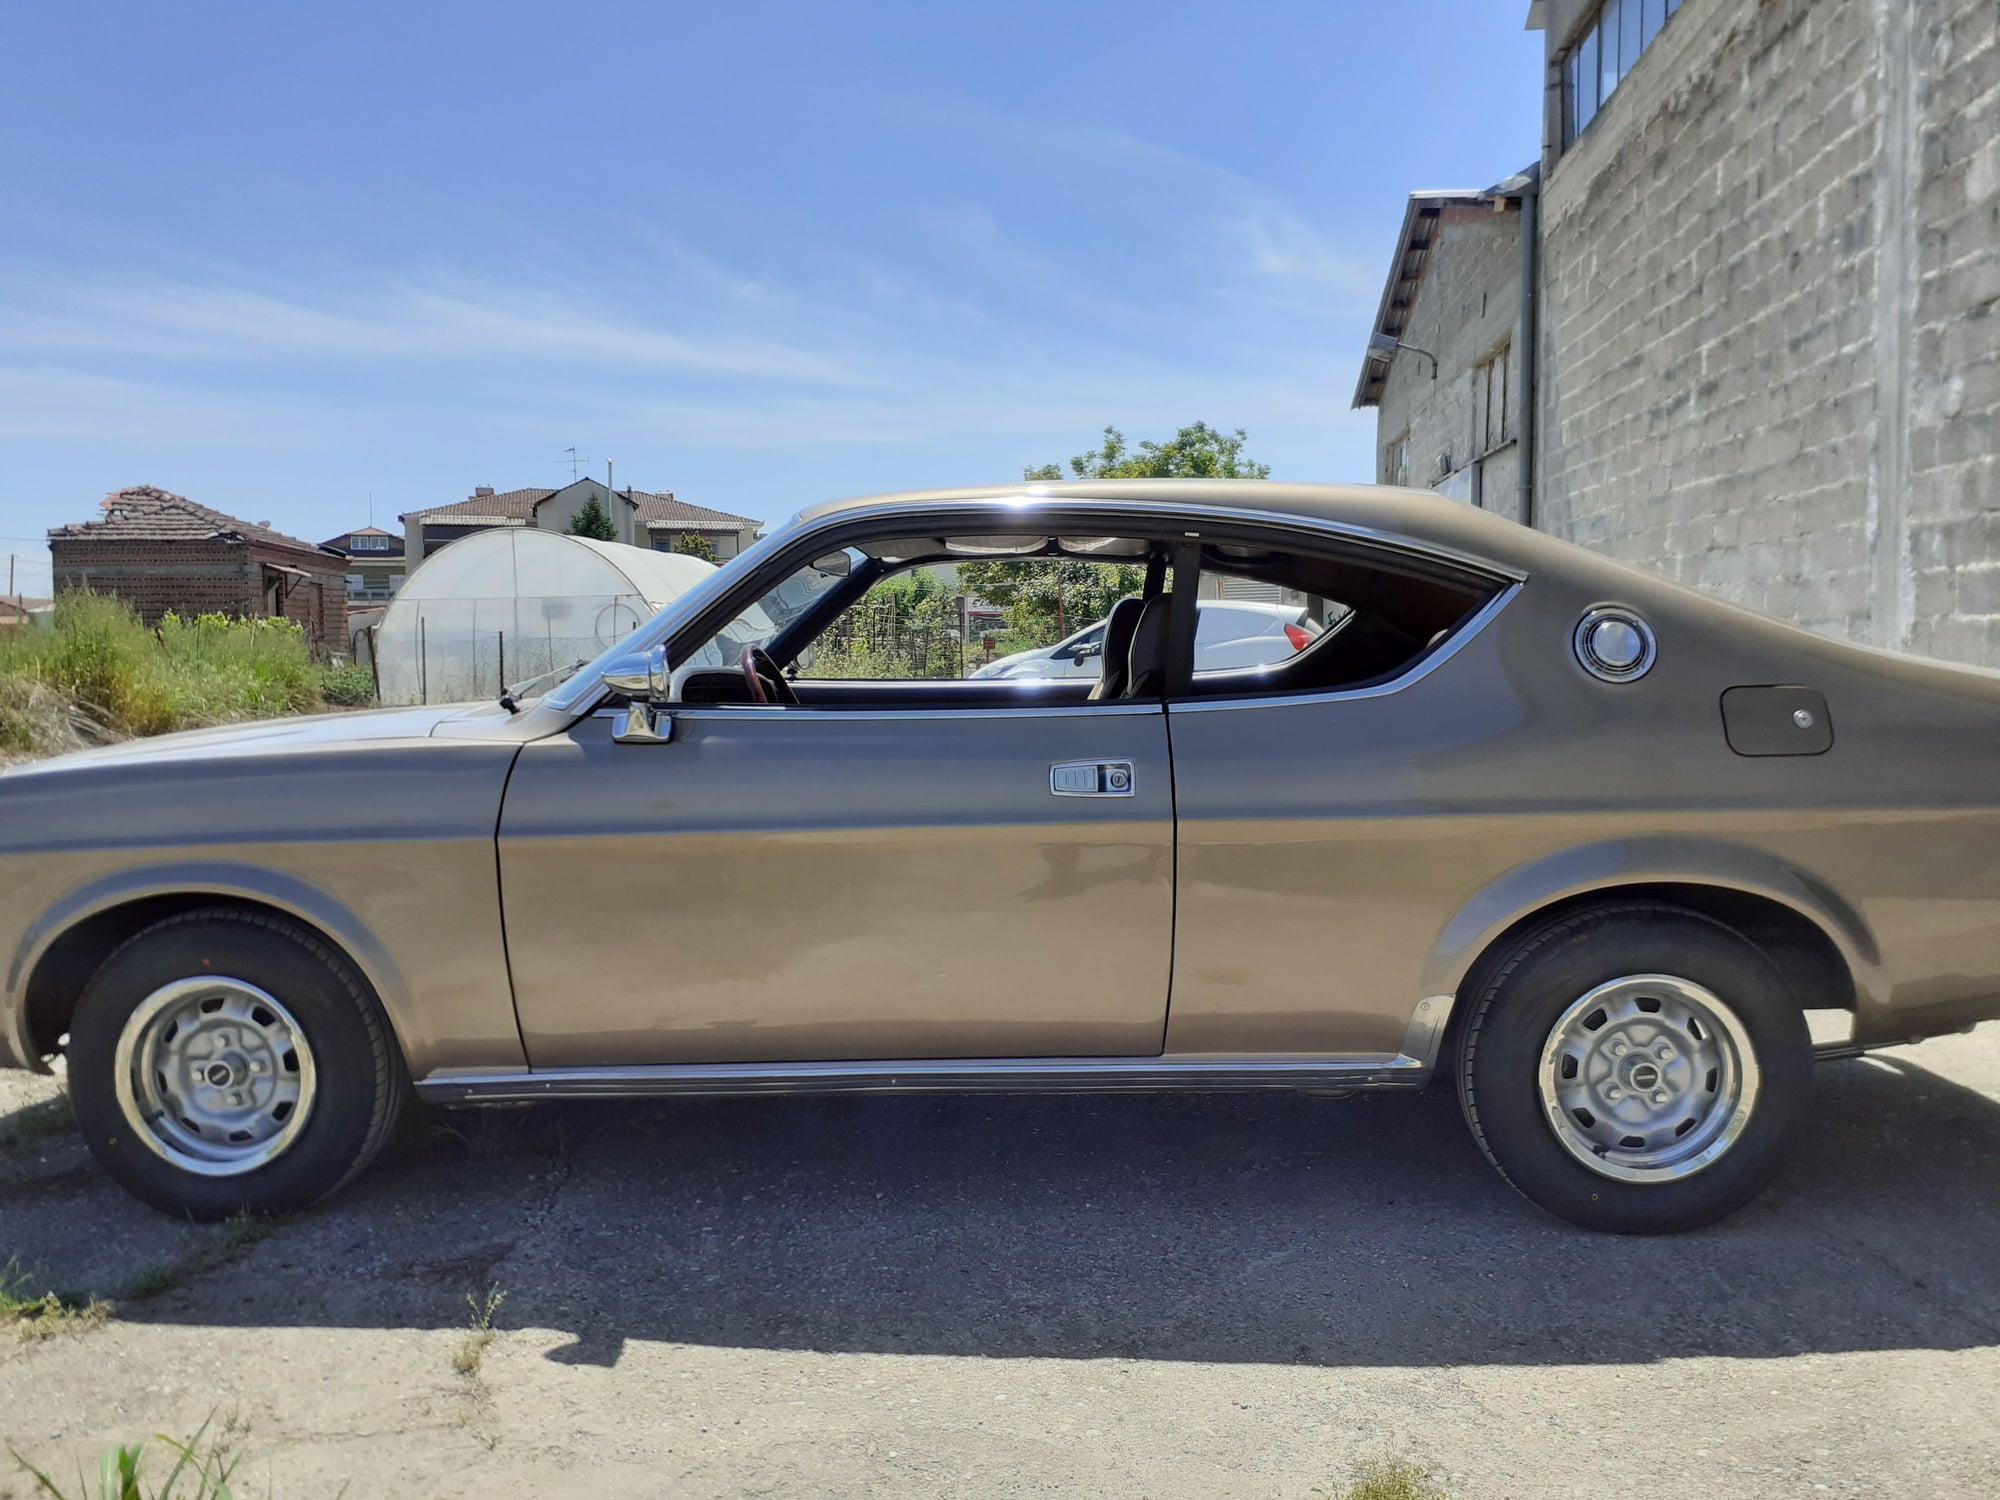 1977 Mazda RX-4 - My 12A - Used - VIN LA22S-156485 - 66 Miles - Other - 2WD - Manual - Coupe - Brown - Veria Imathia Central Macedonia, Greece